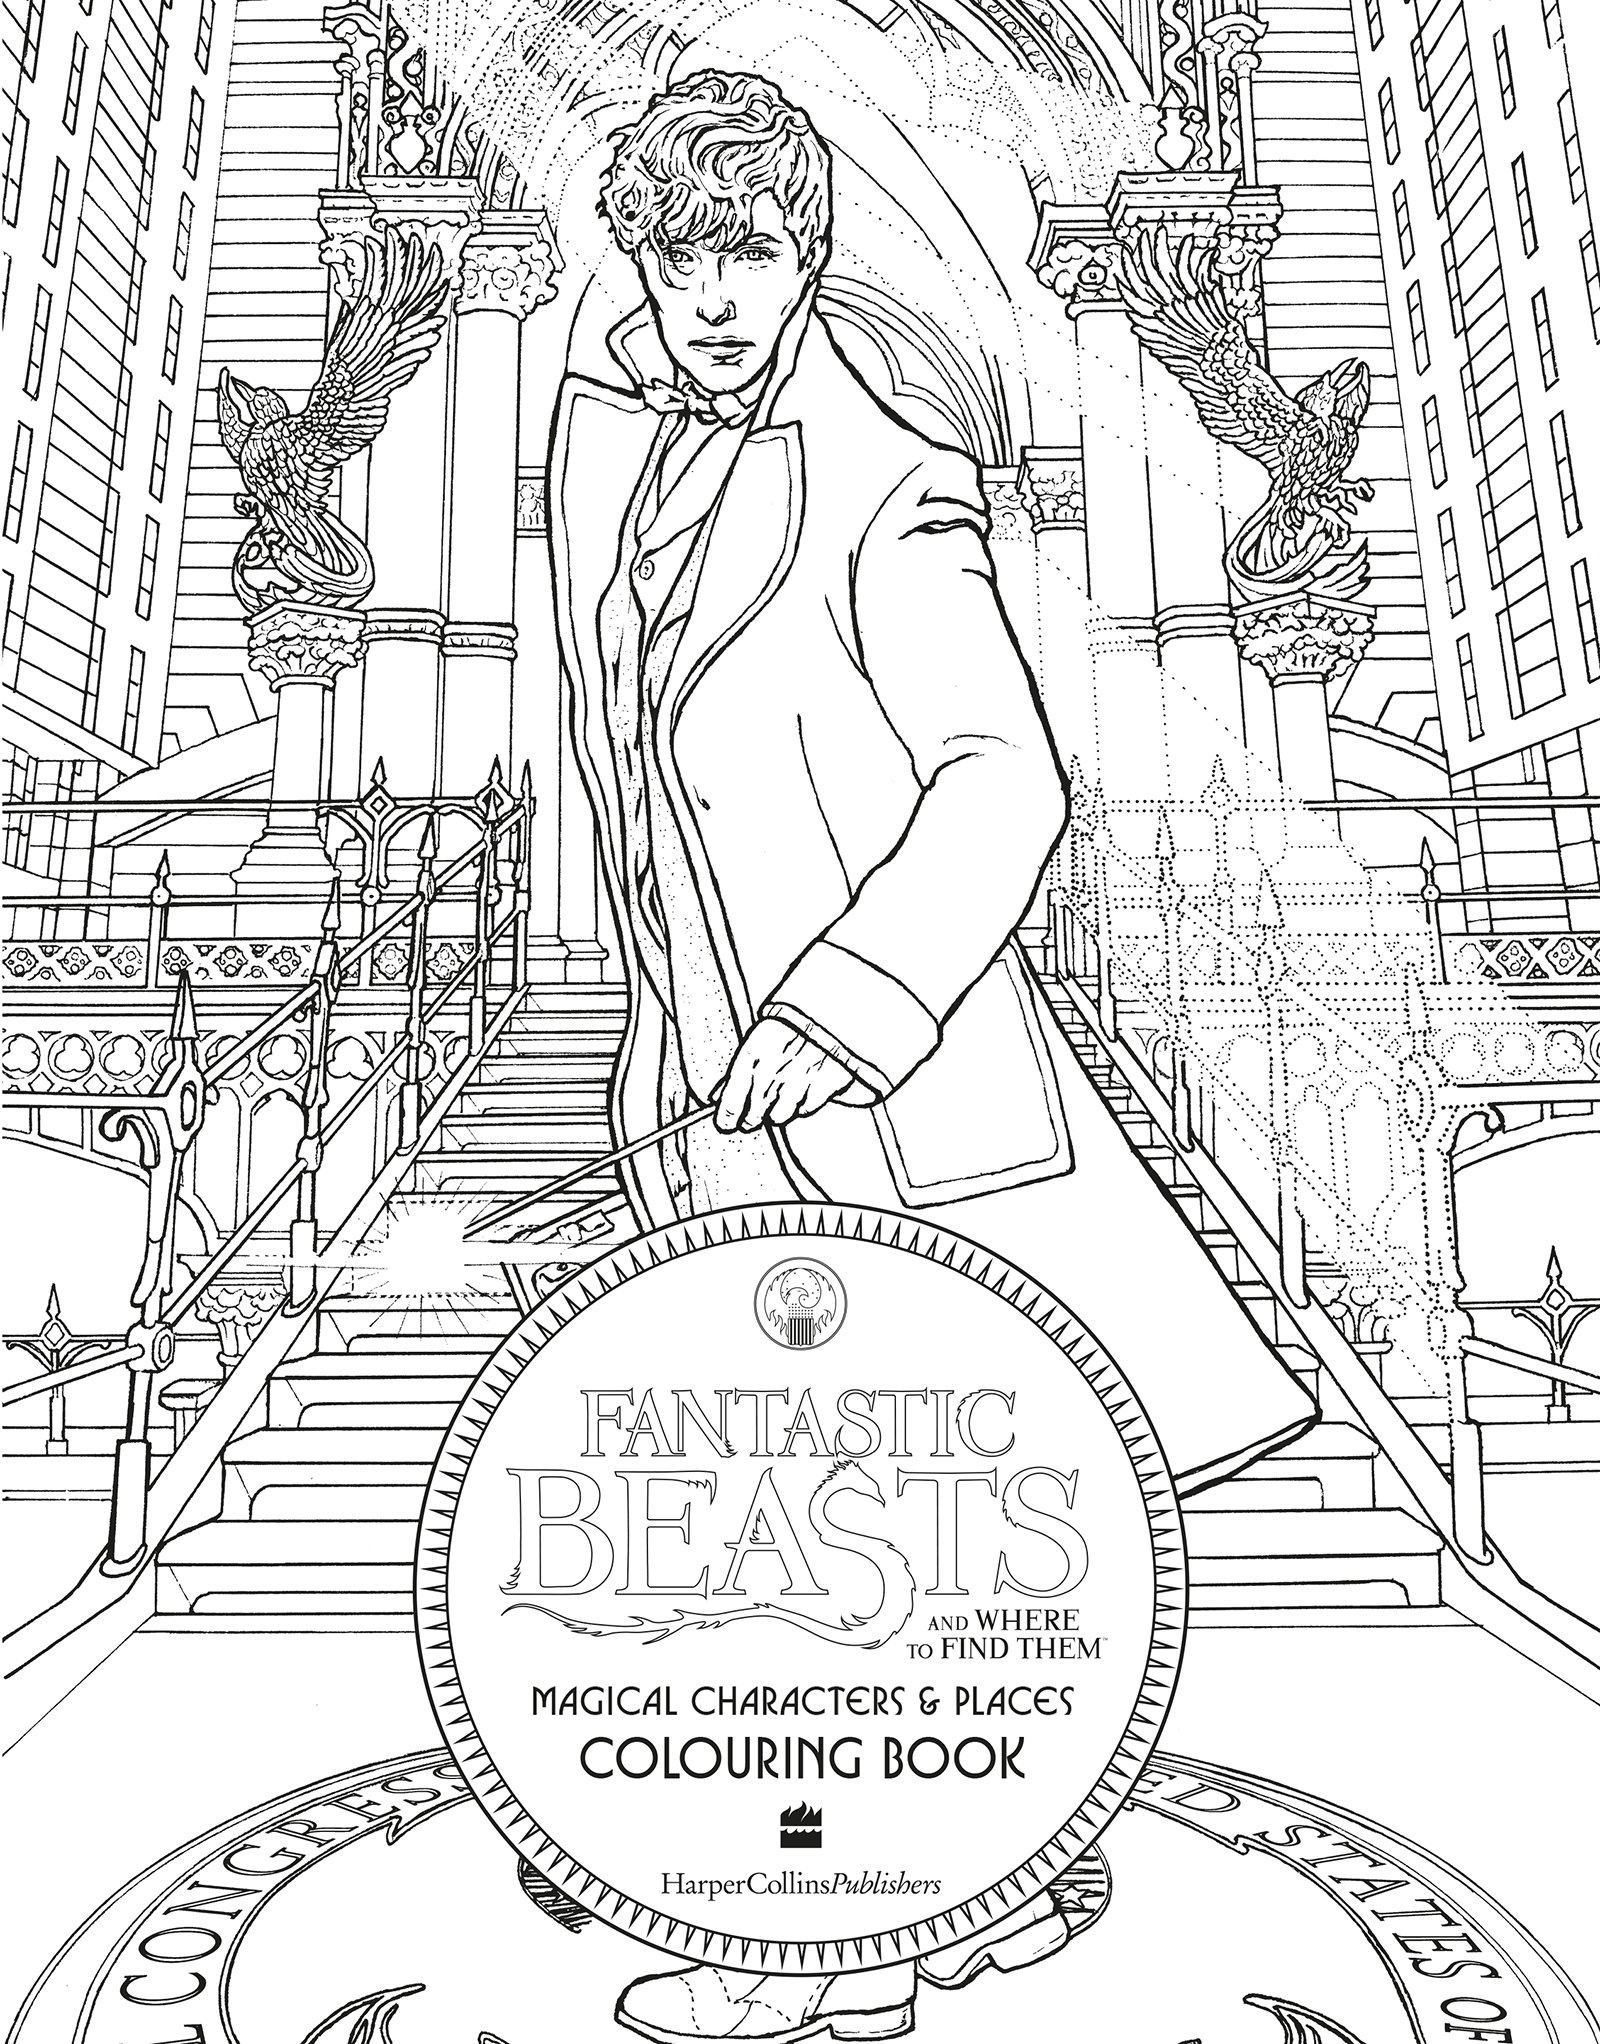 Fantastic Beasts and Where to Find Them |  image3